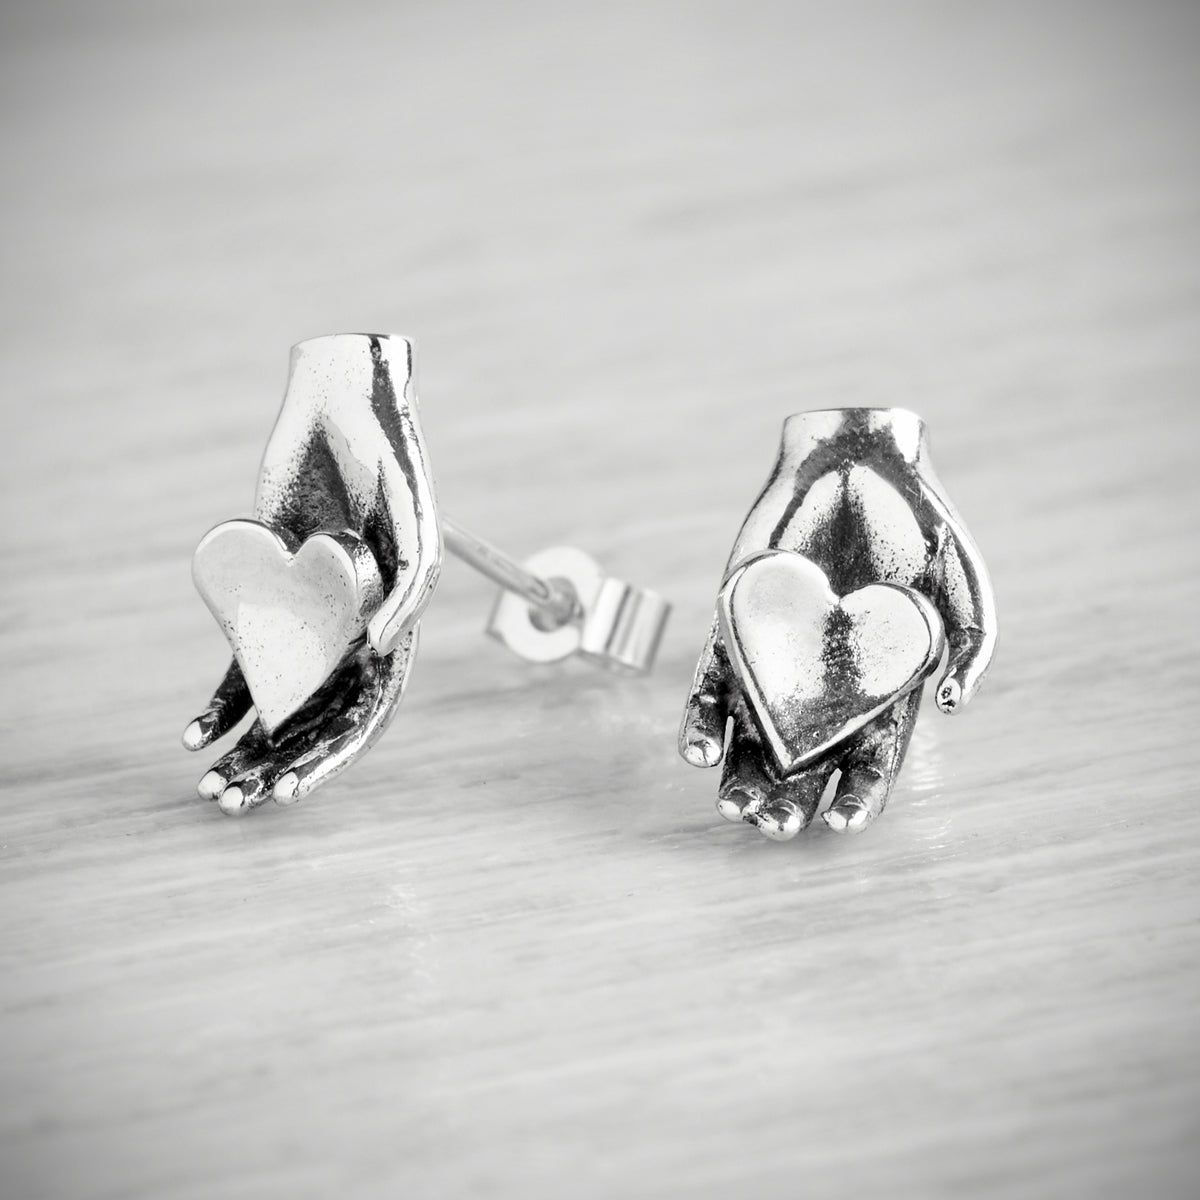 Tiny Heart in Hand Stud Earrings by Emma White